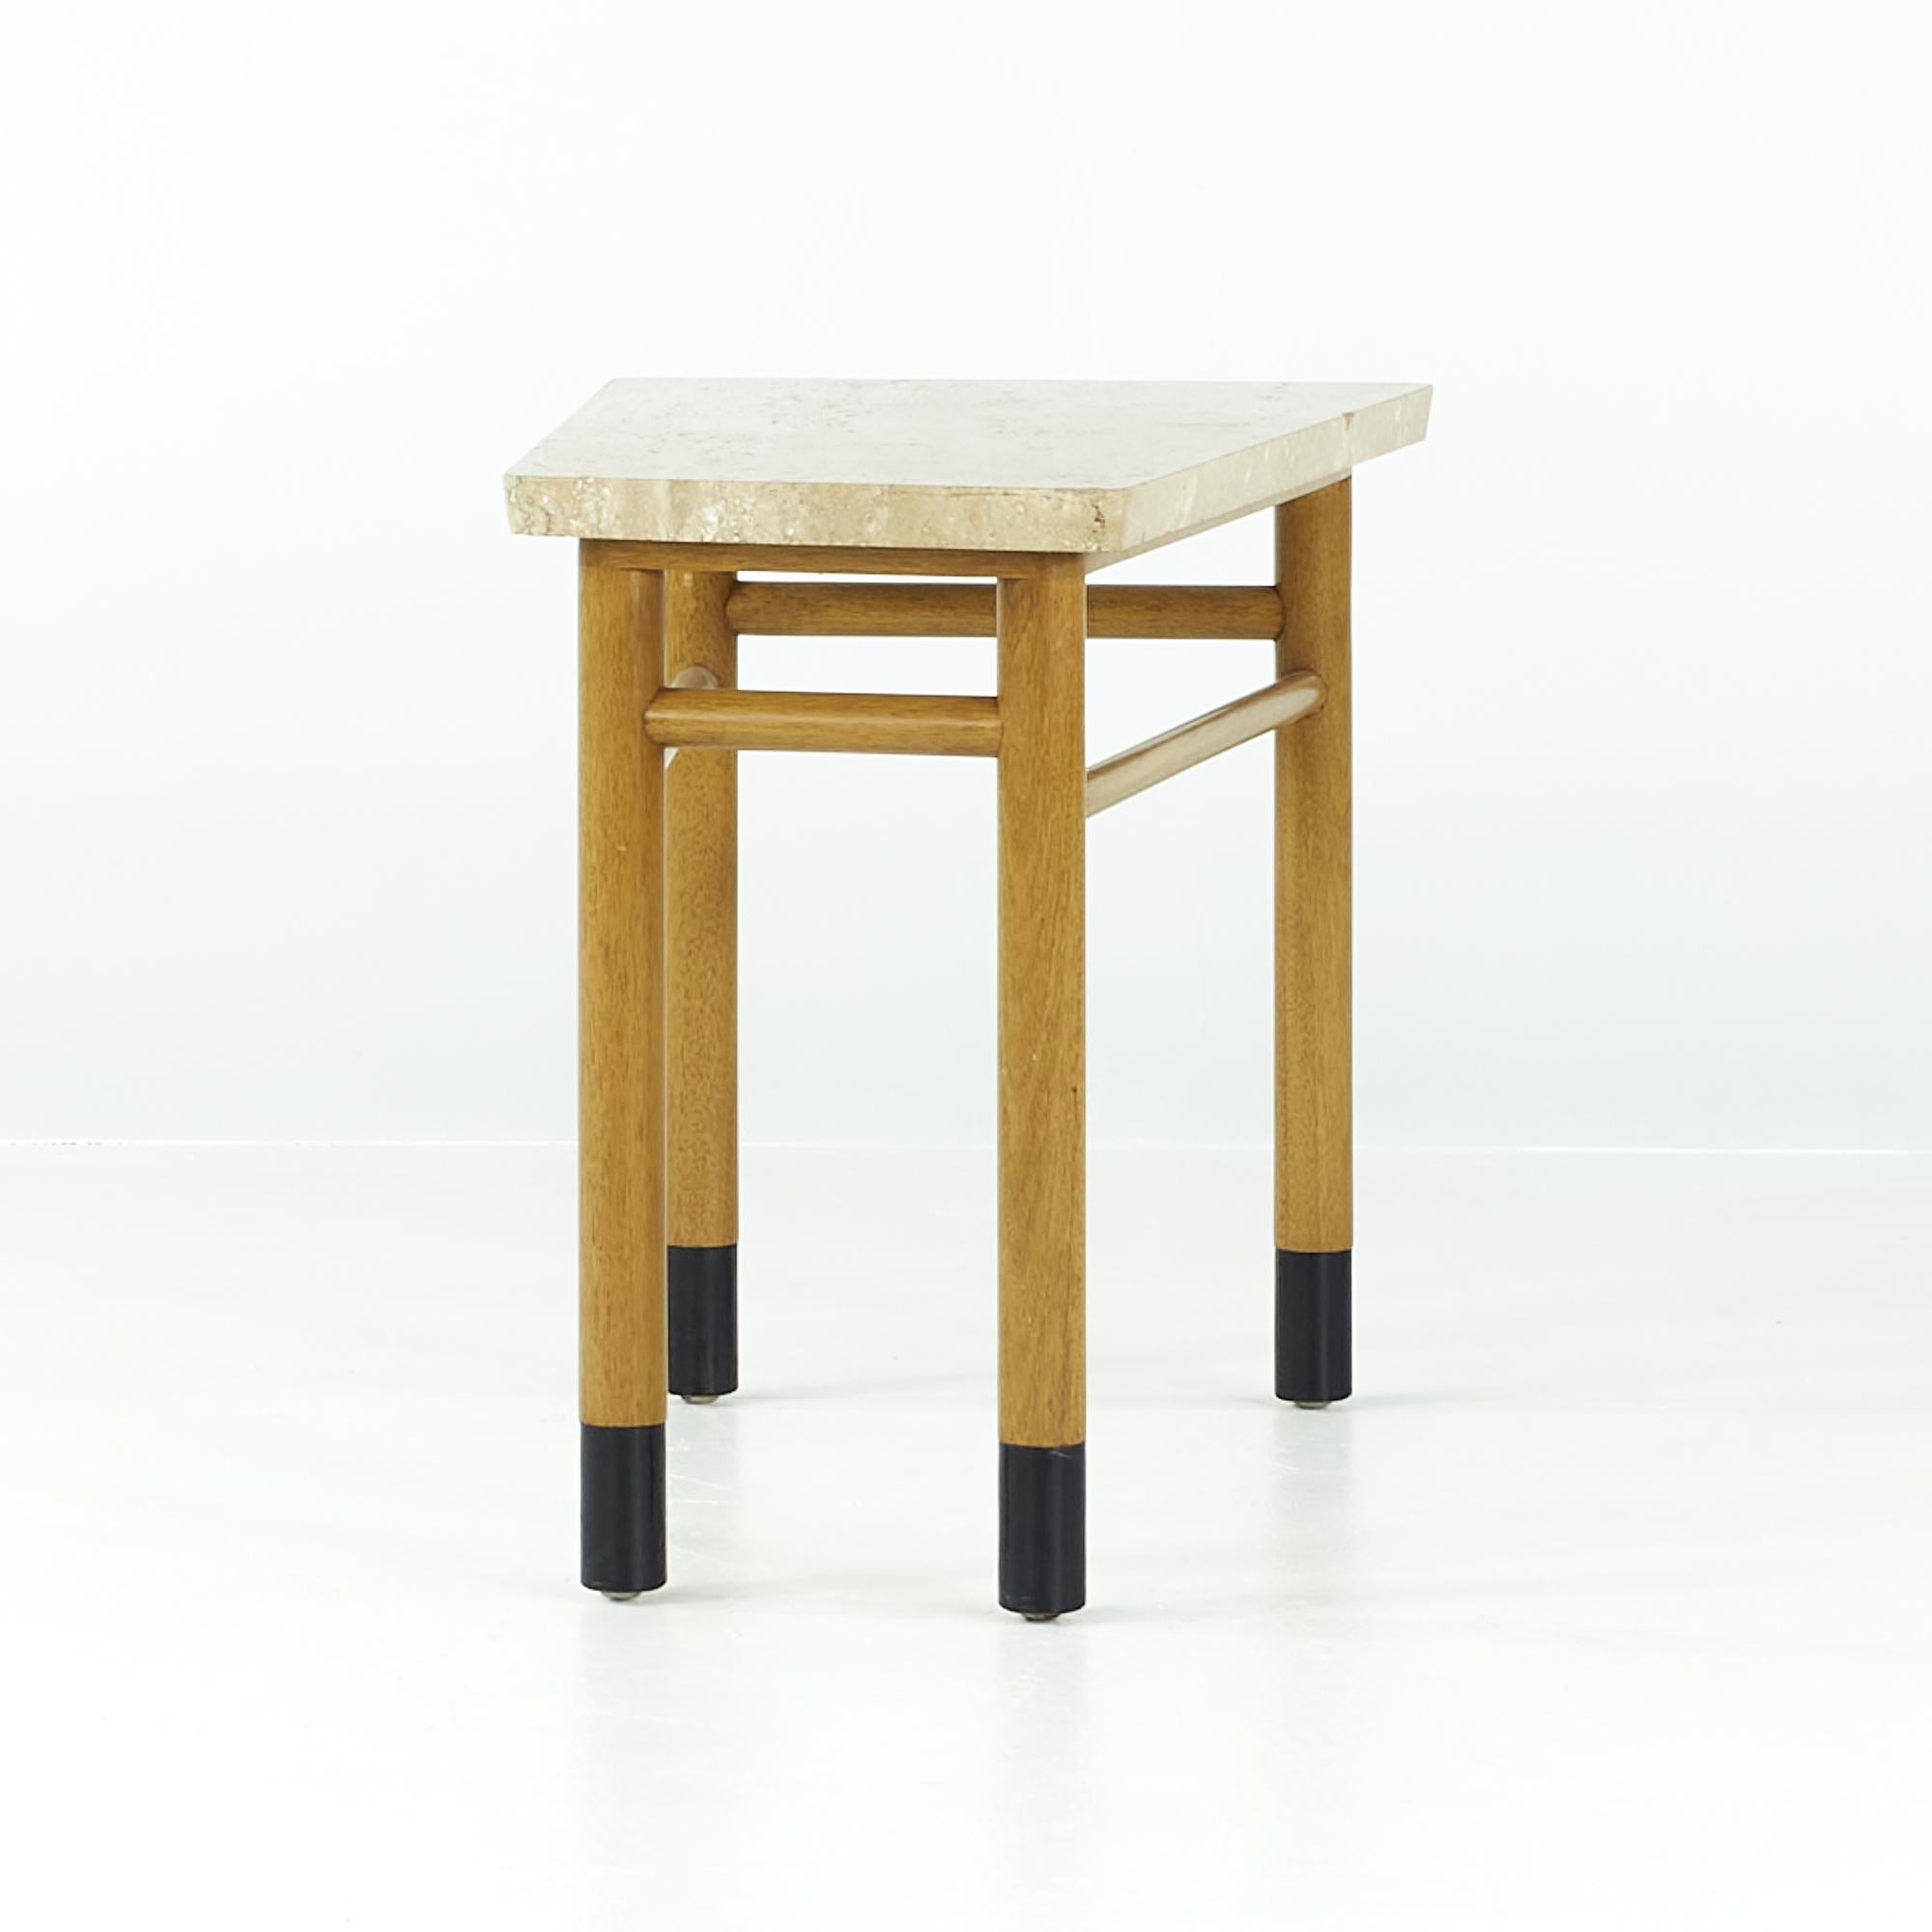 Edward Wormley for Dunbar Midcentury Travertine Wedge Tables, Pair In Good Condition For Sale In Countryside, IL